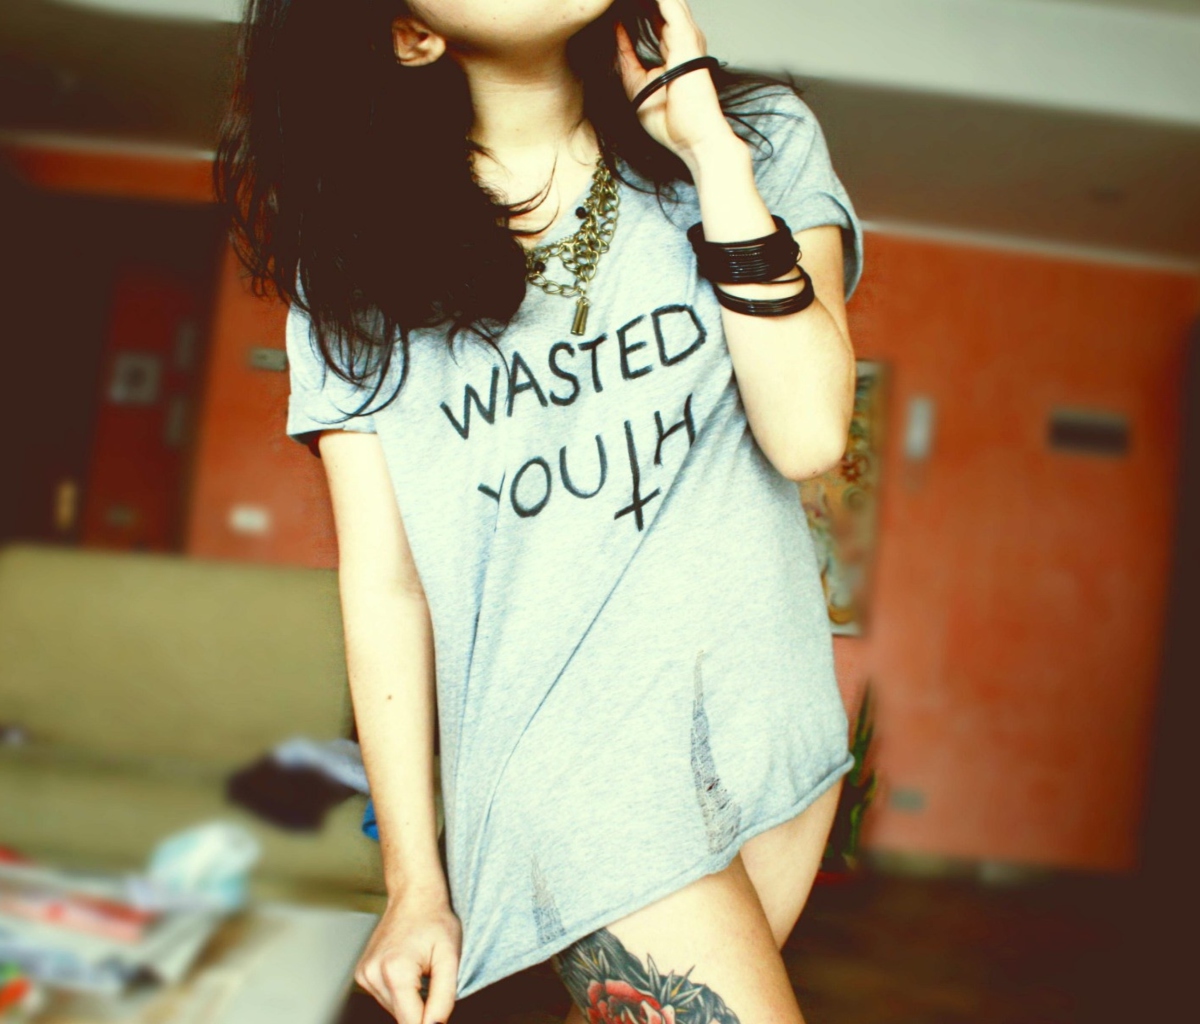 Wasted Youth T-Shirt wallpaper 1200x1024